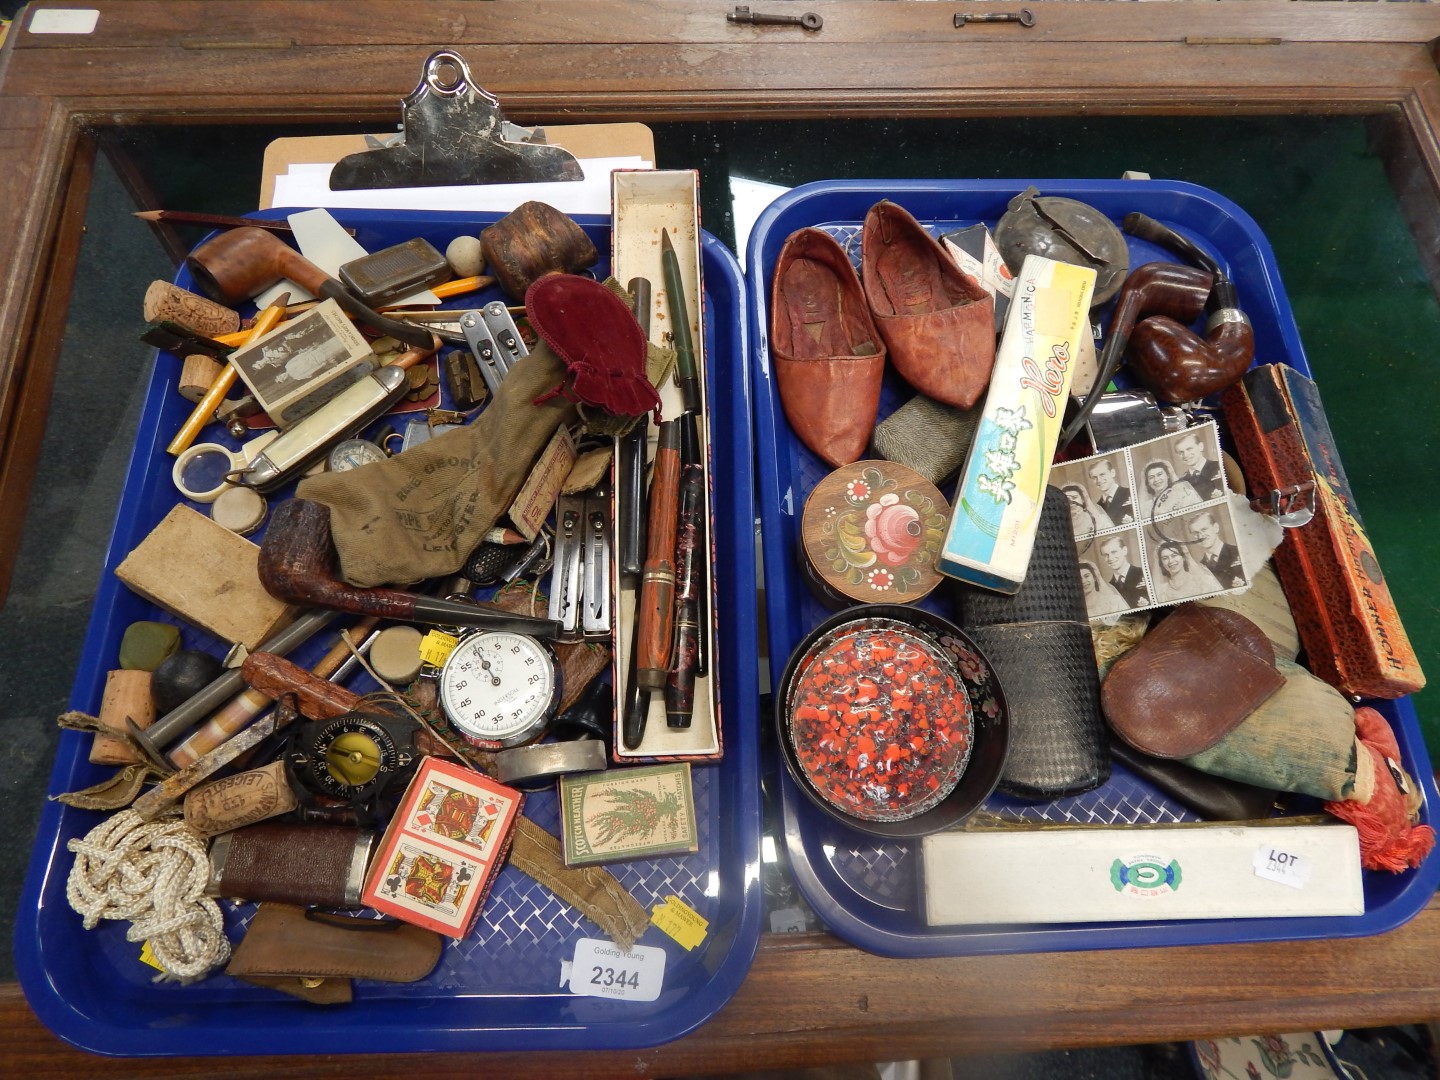 Vintage pens, briar wood pipes, an Ingersoll stopwatch and sundry collectables. (2 trays)